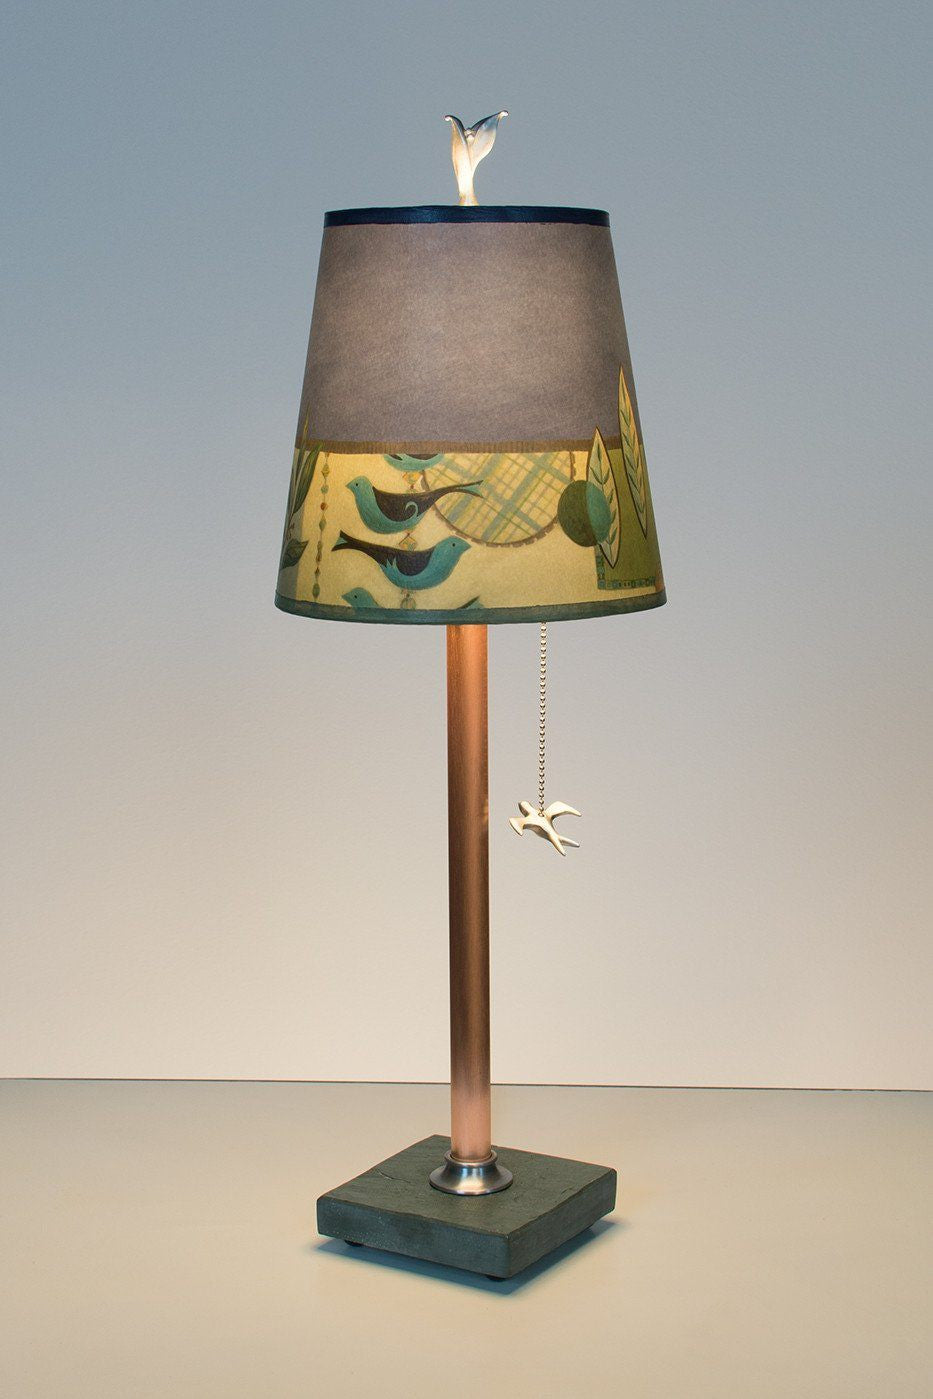 Janna Ugone & Co Table Lamps Copper Table Lamp with Small Drum Shade in New Capri Periwinkle